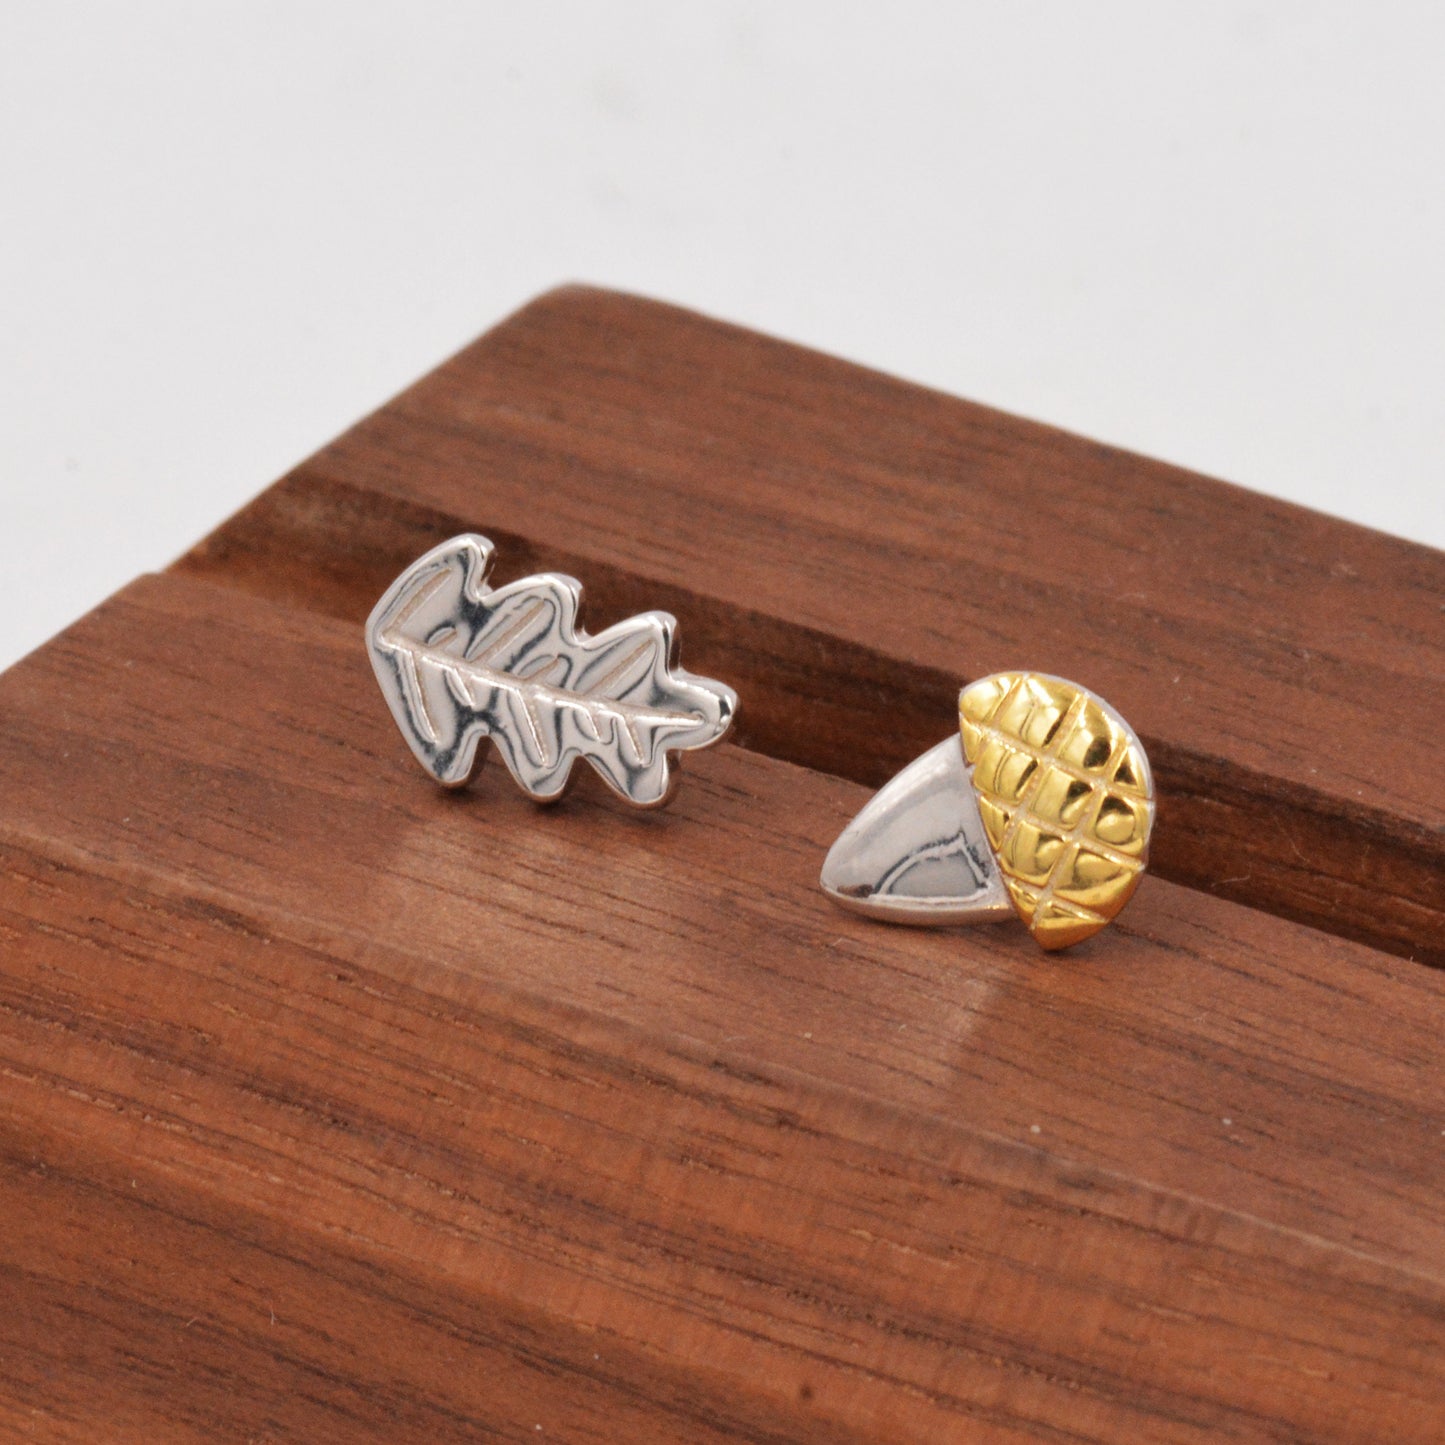 Mismatched Acorn and Oak Leaf Stud Earrings in Sterling Silver, Petite Earrings, Small Leaf Stud, Nature Inspired